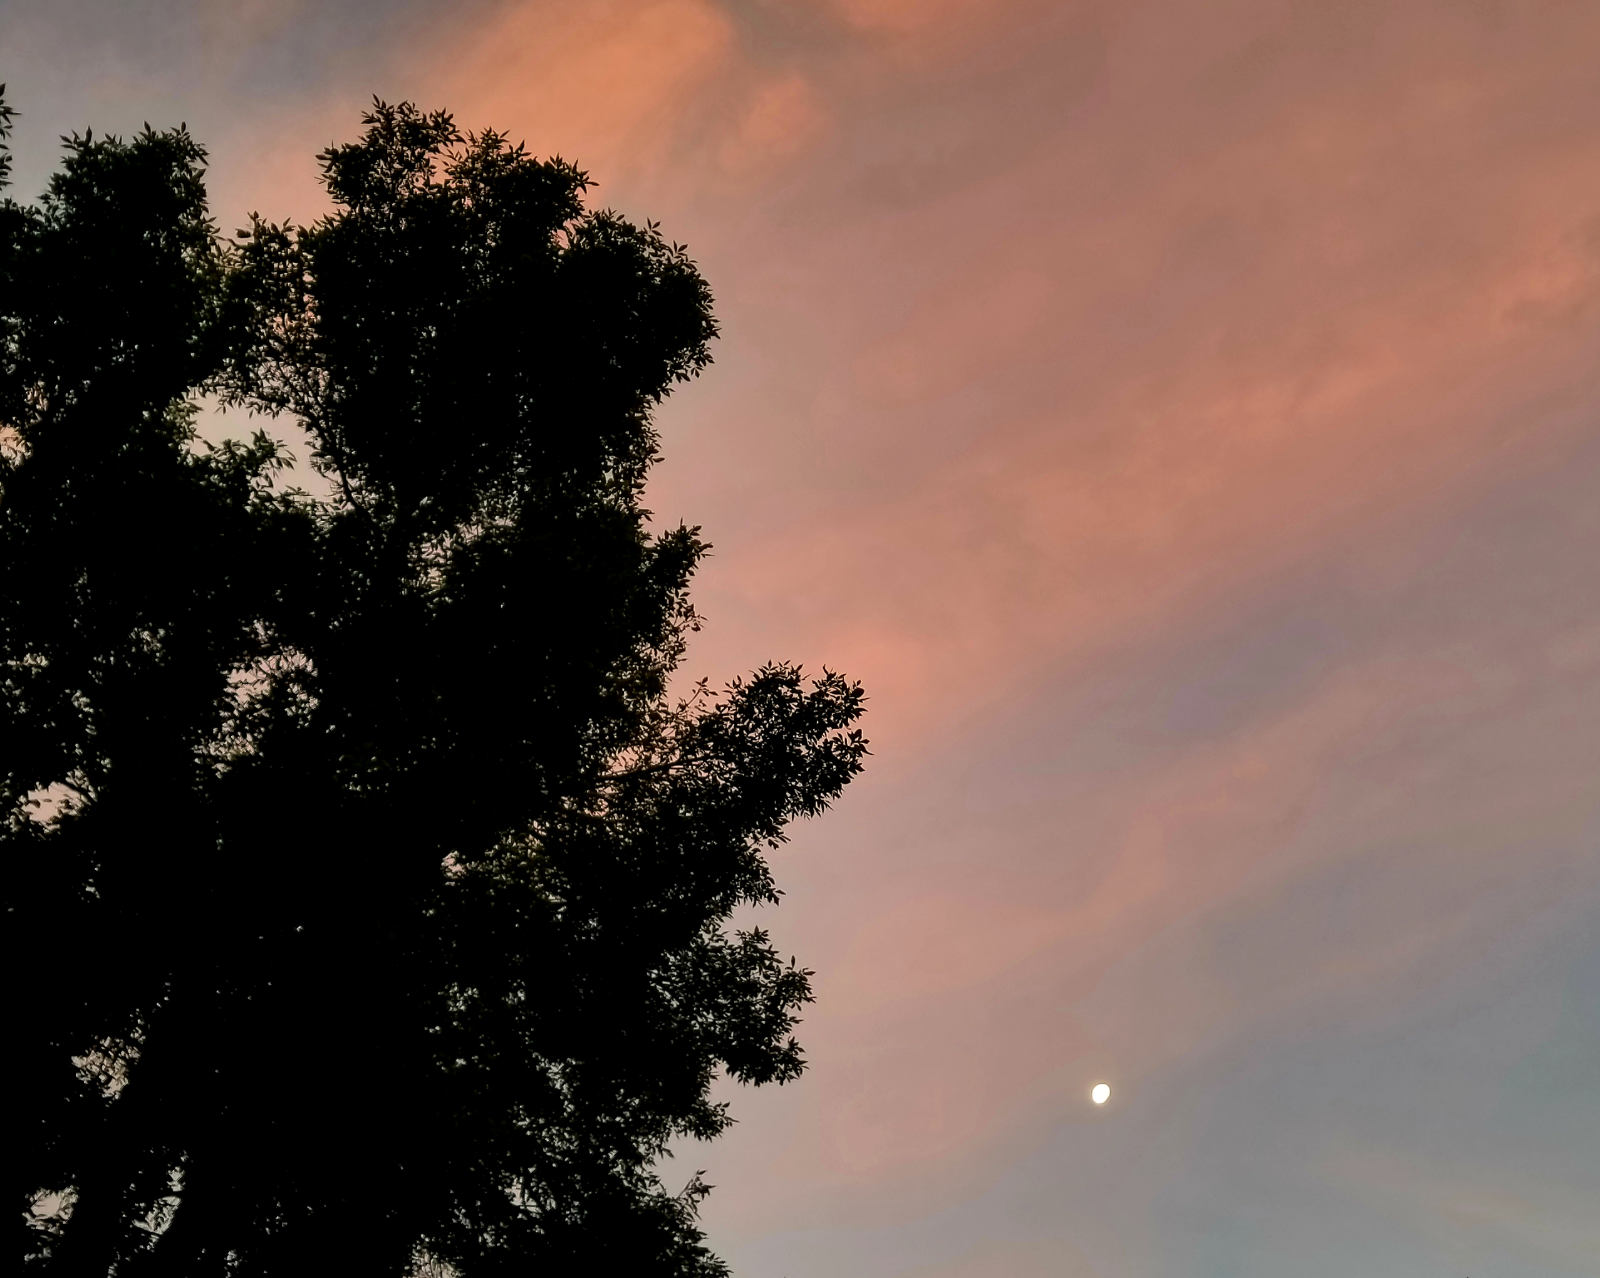 small white circle of the moon in a dim sky with reddish streaks of clouds across, with the silhouette of a large tree covering much of the left frame